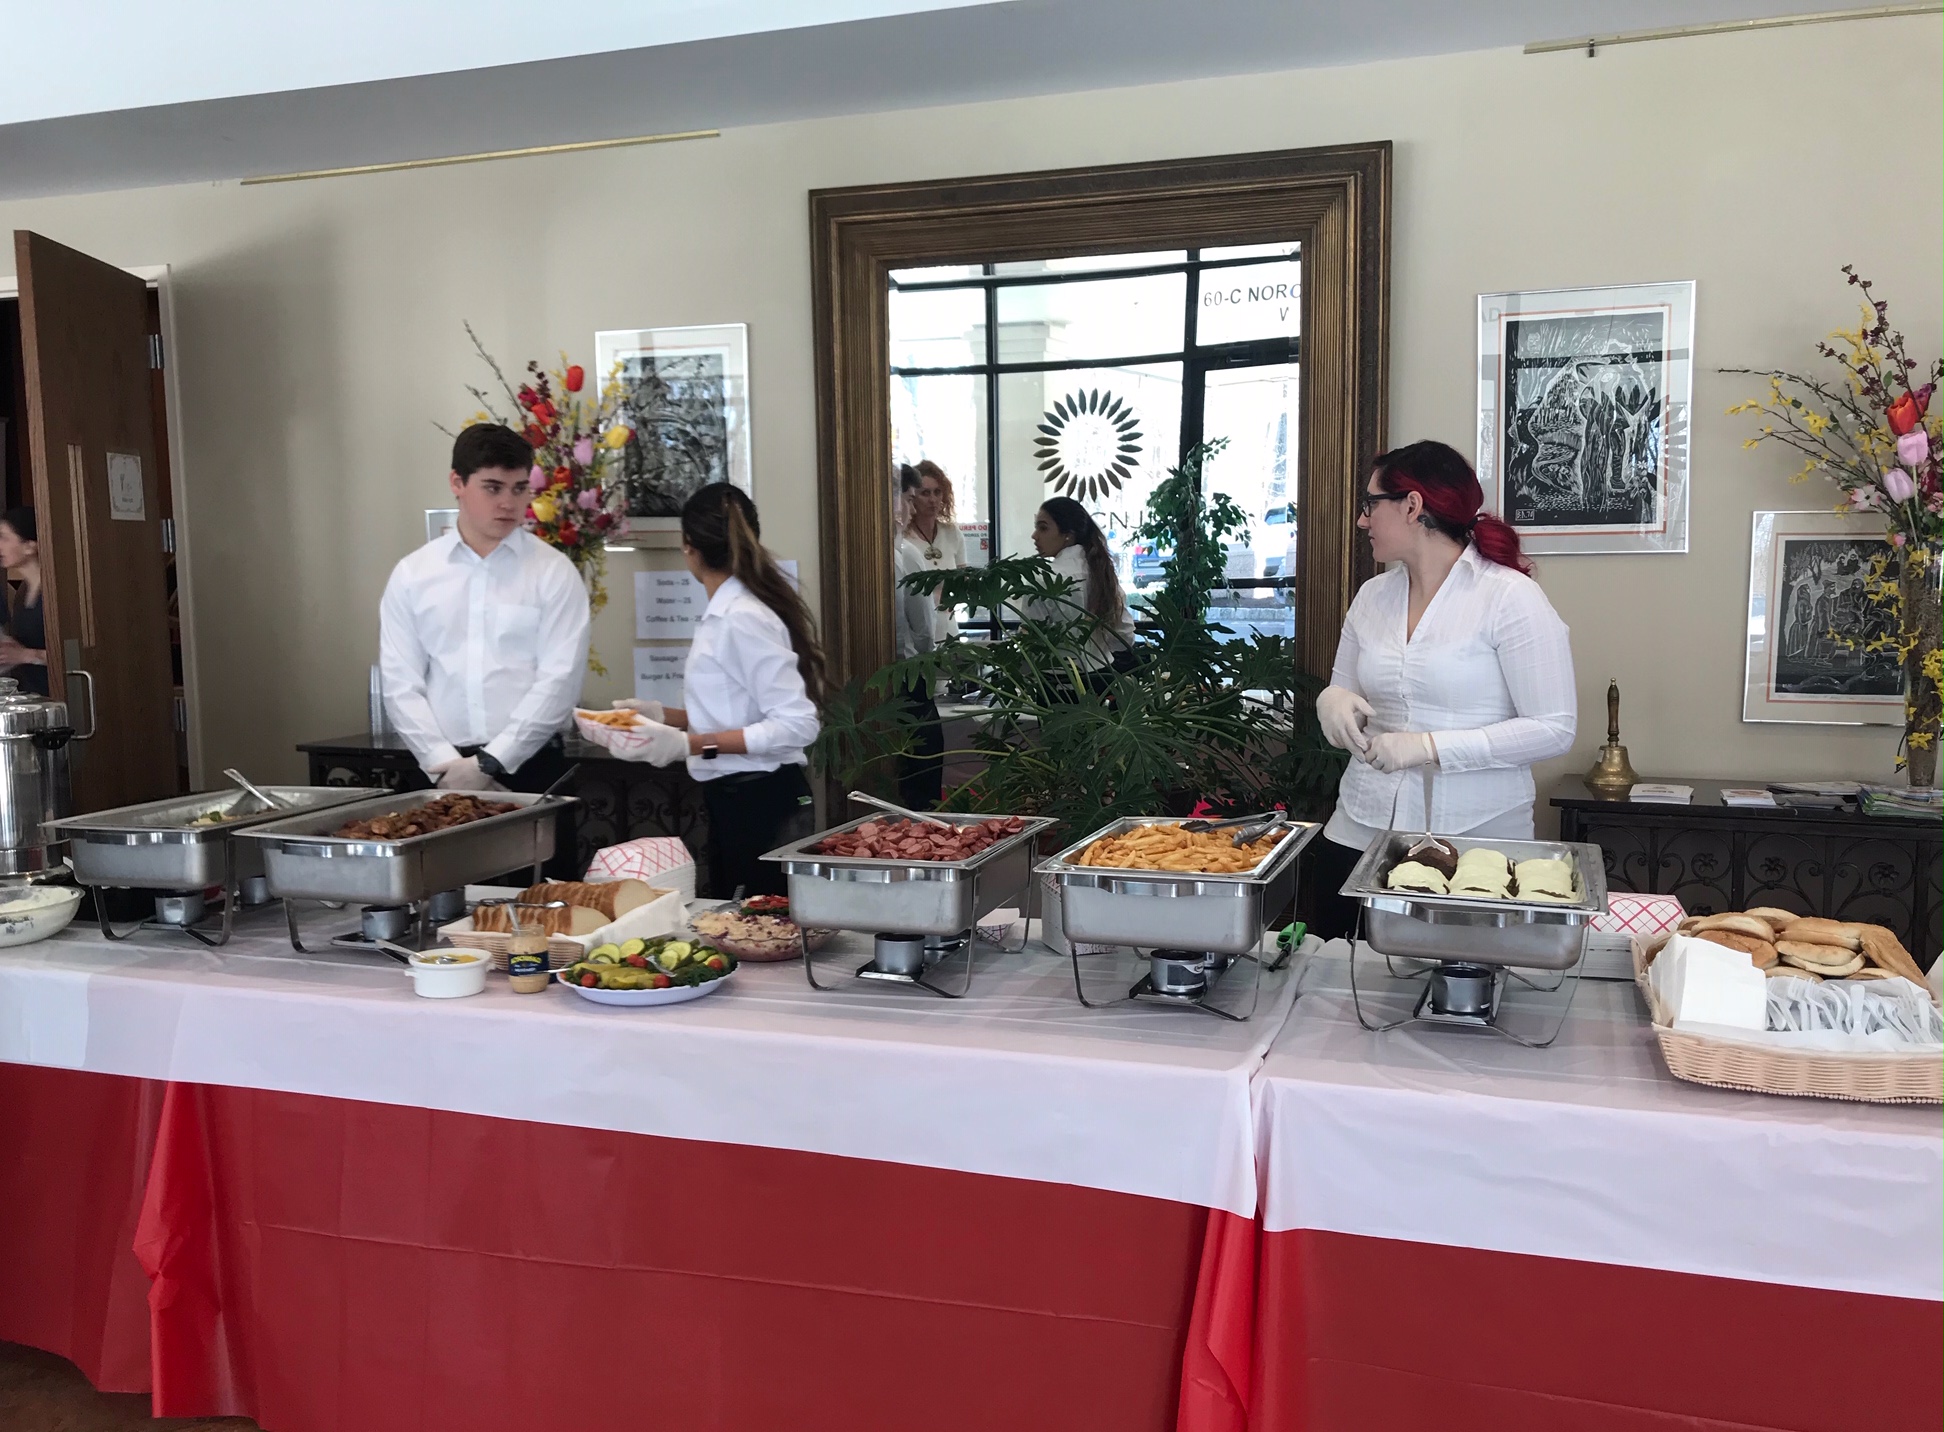 Ukrainian American Cultural Center - Catering and Kitchen